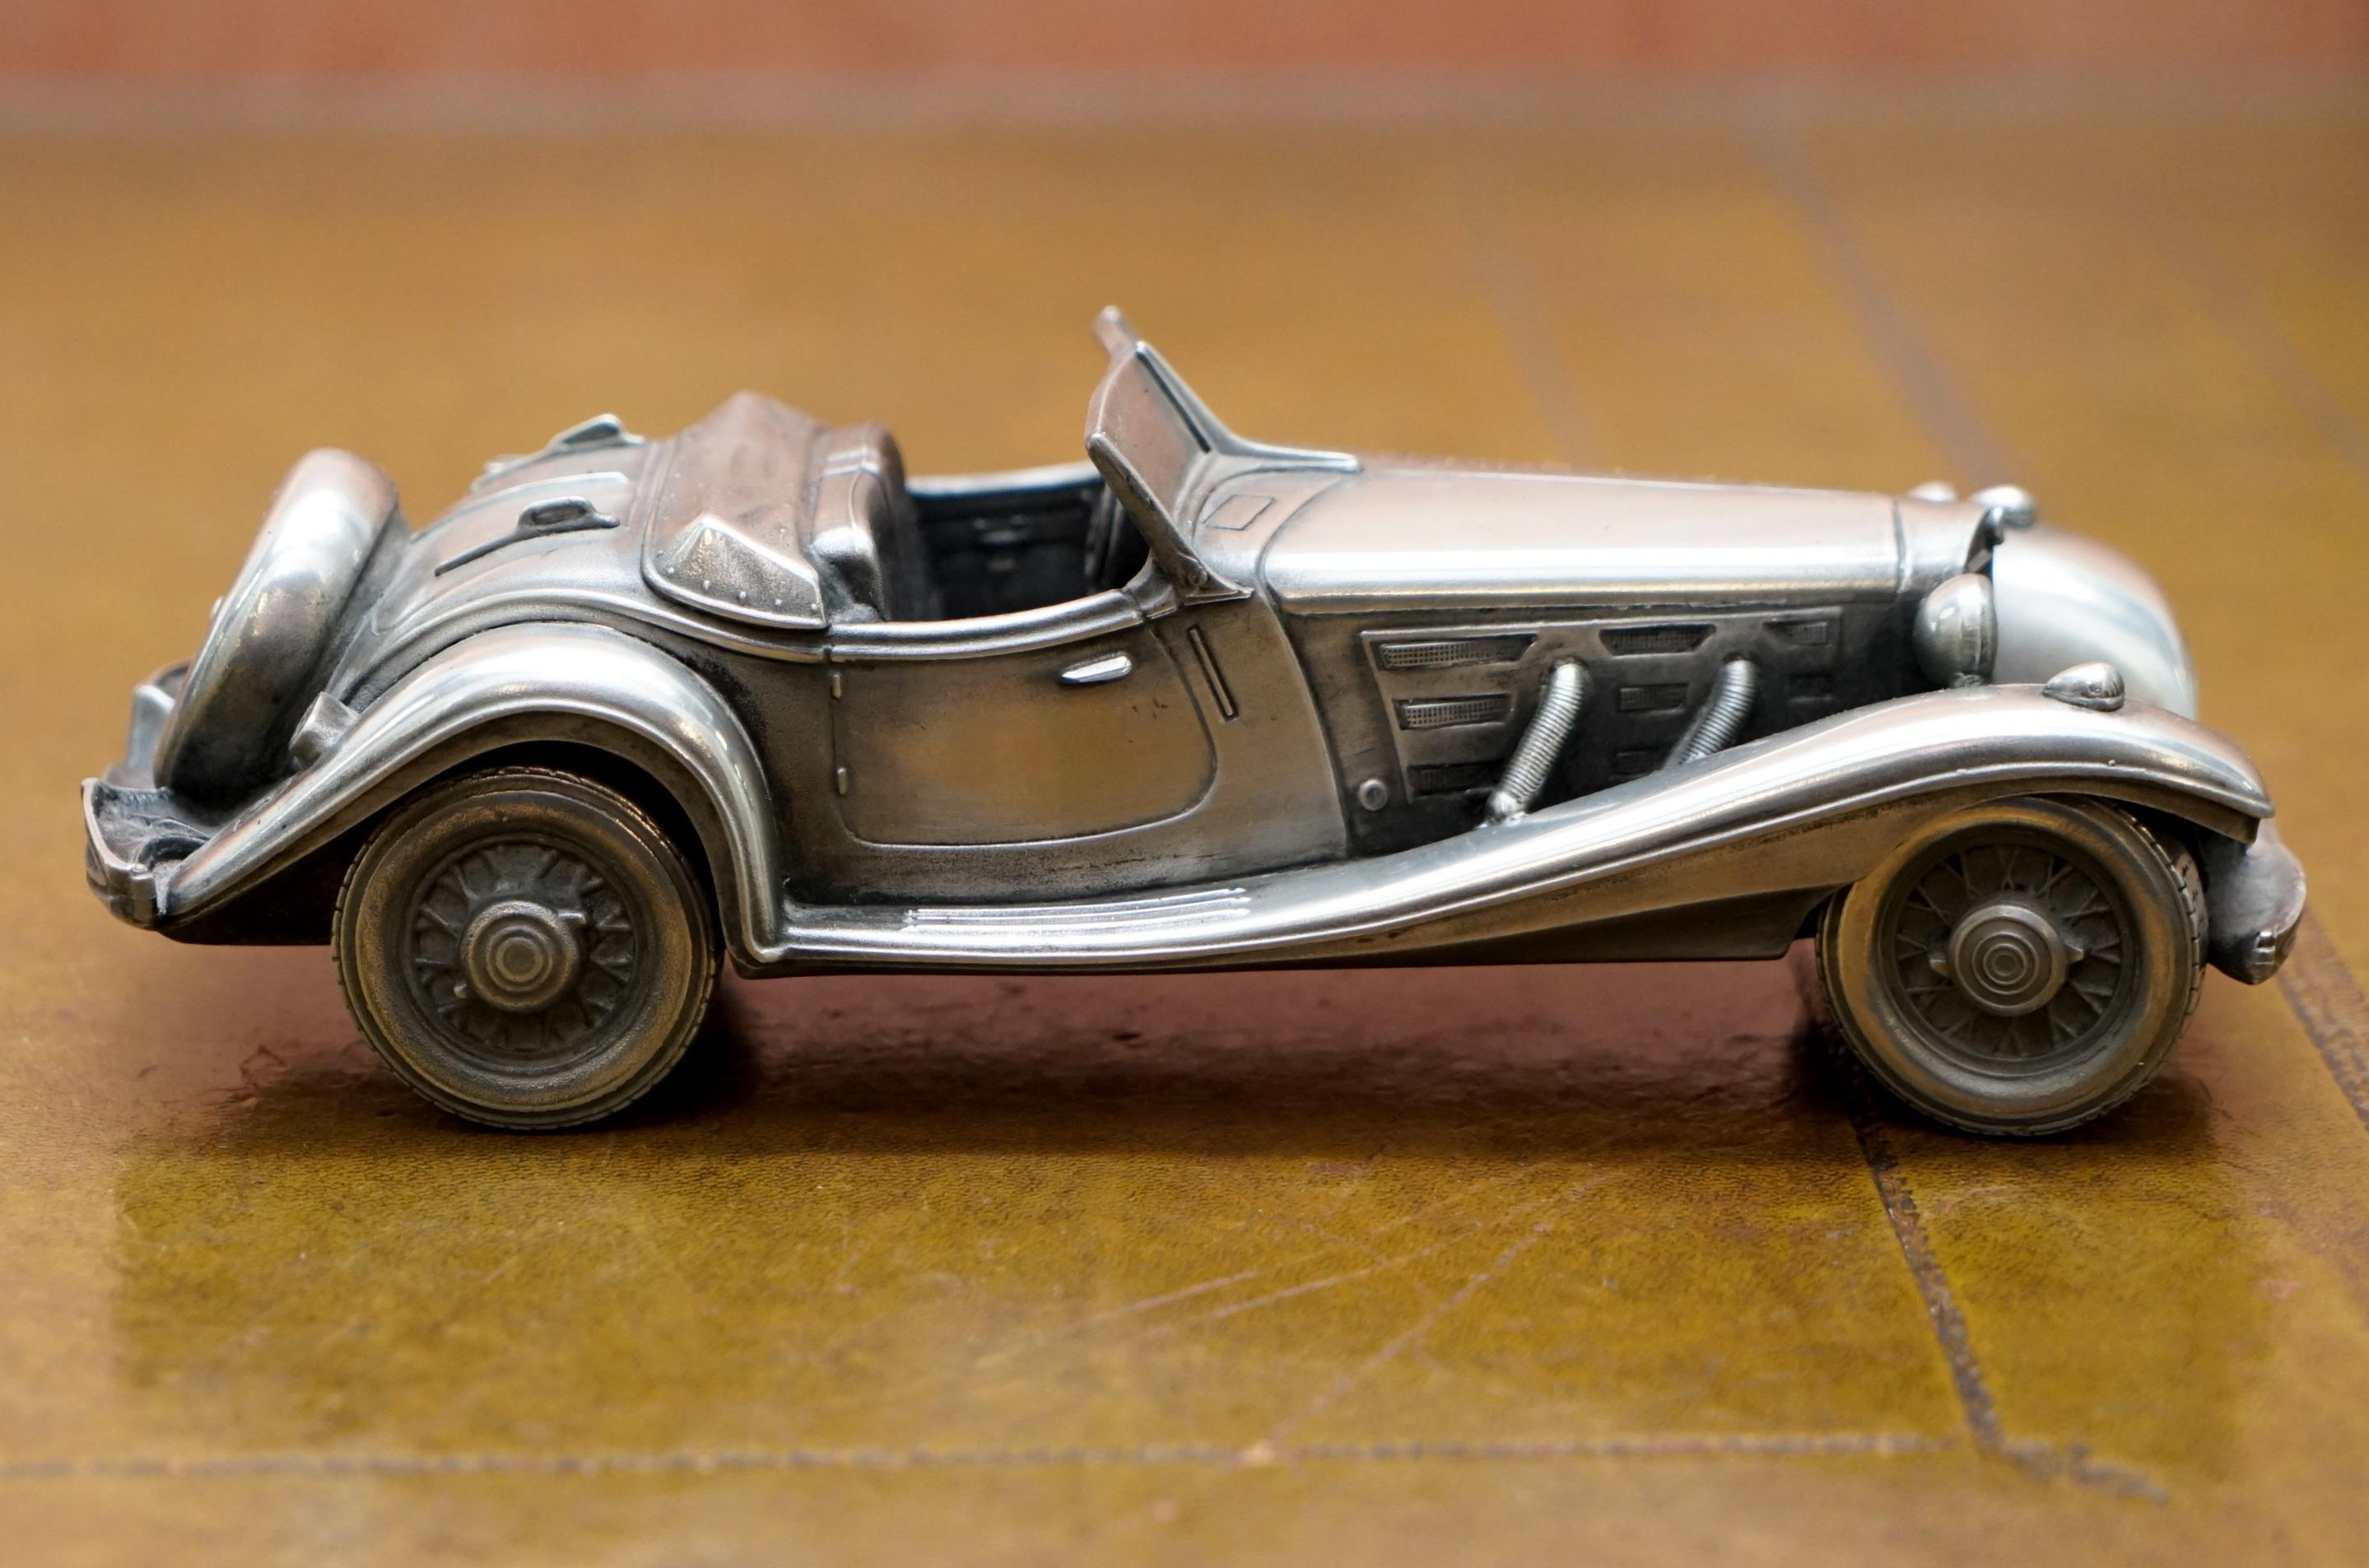 We are delighted to offer for sale this lovely original Pewter plated medium sized Compulsion gallery 1939 Mercedes-Benz 540K Special Roadster

This is a medium size, it’s in perfect vintage condition

History

Introduced at the 1936 Paris